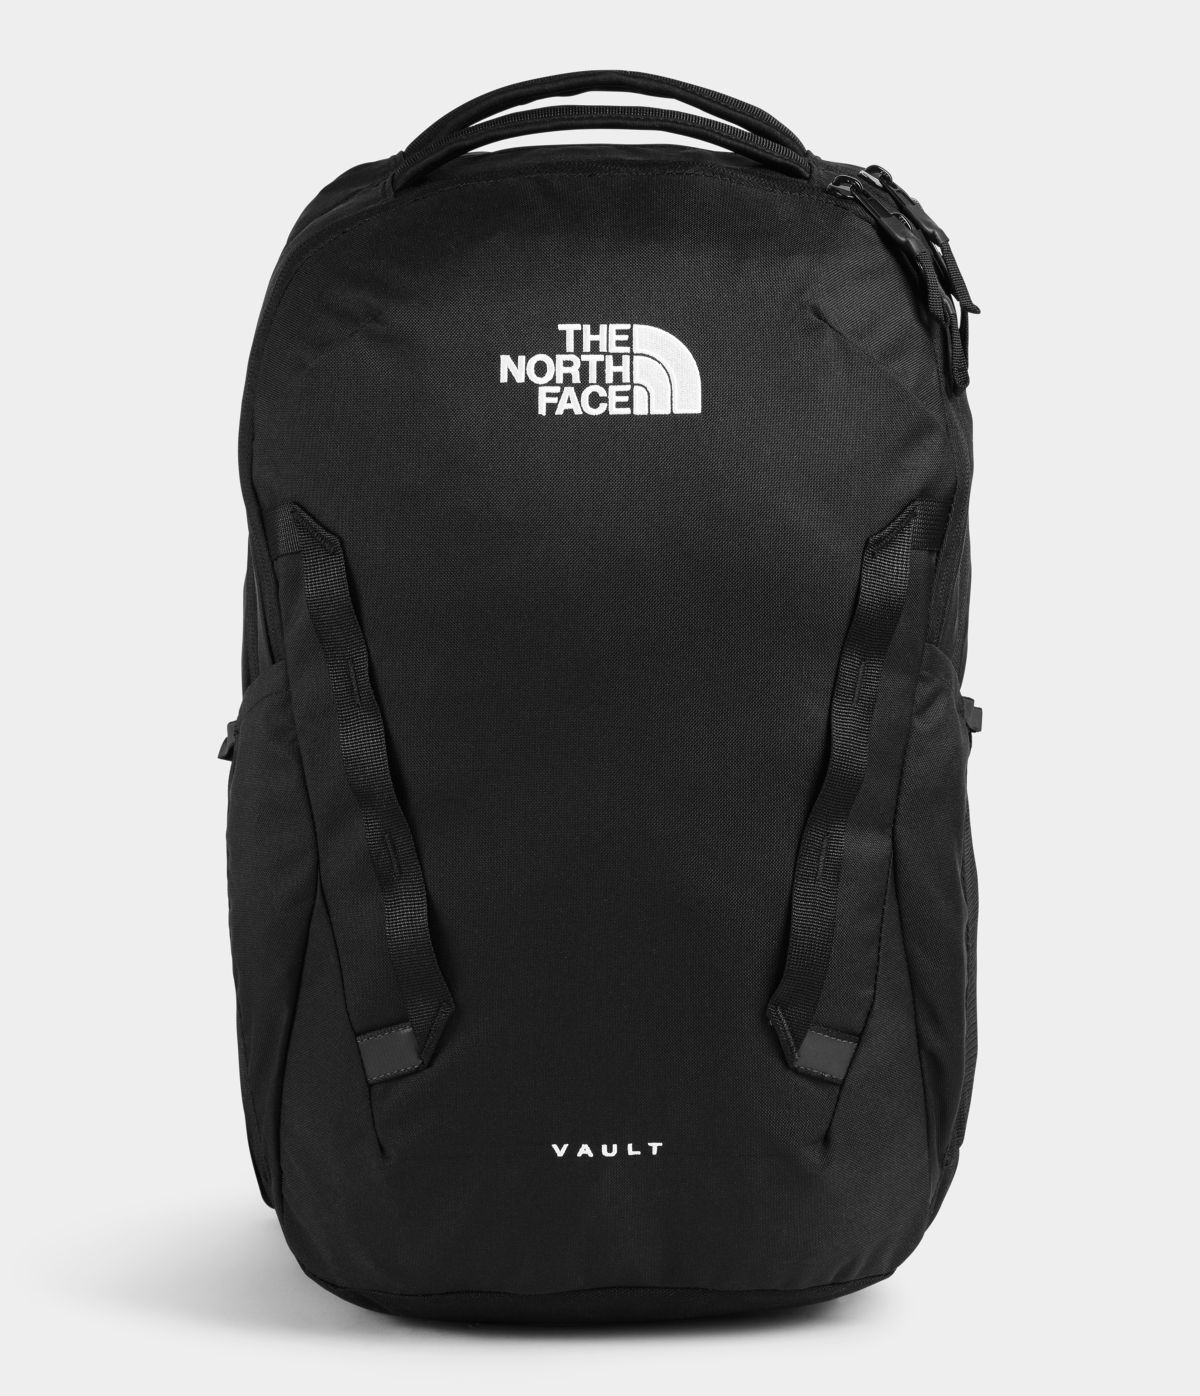 Unisex The North Face Vault Backpack in TNF Black from front view